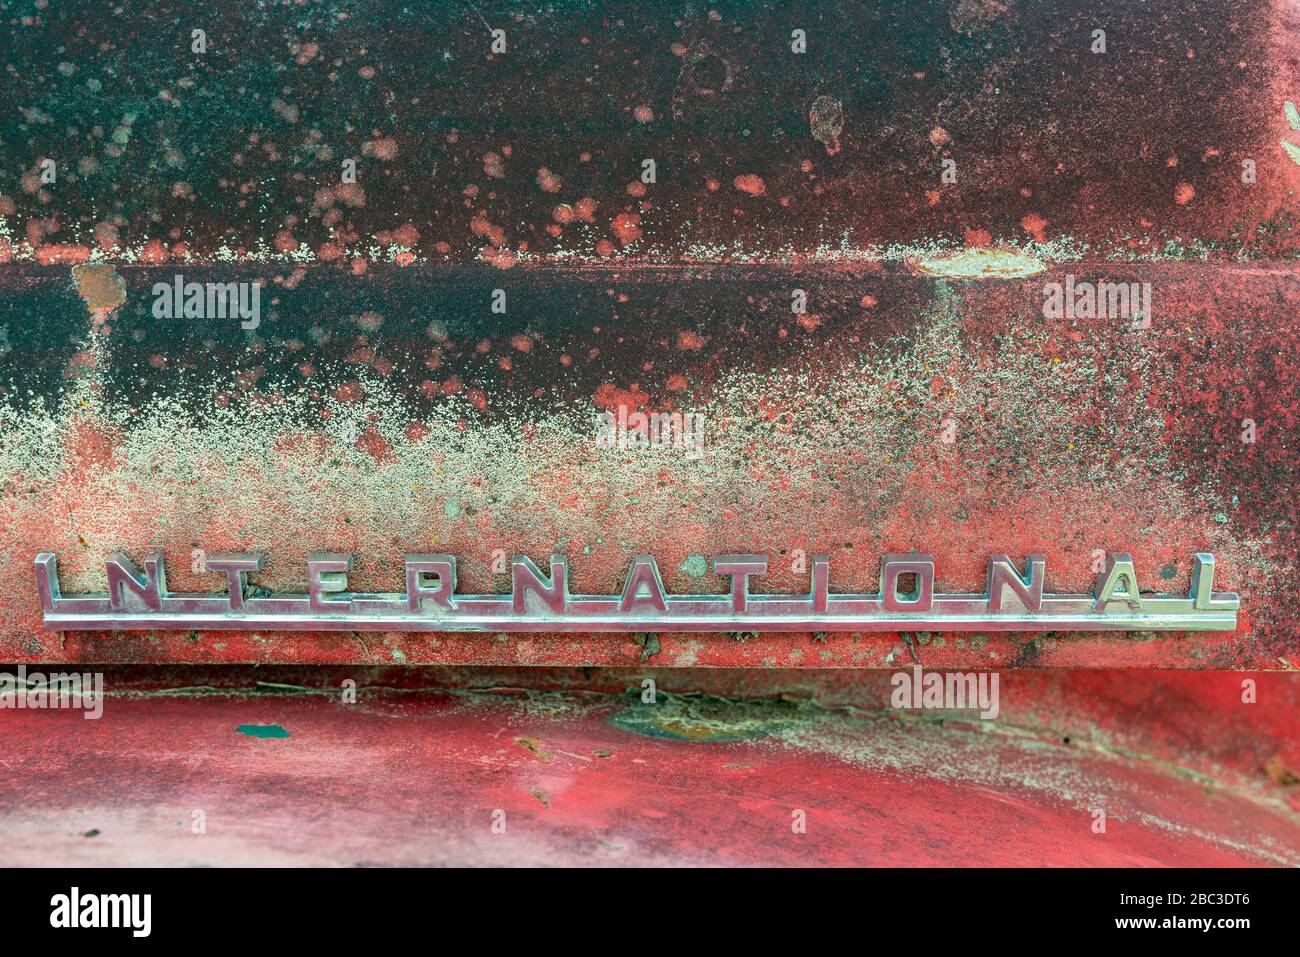 Cassiar, British Columbia, Canada - July 24, 2017: The International logo on a corroded truck panel in a junkyard Stock Photo